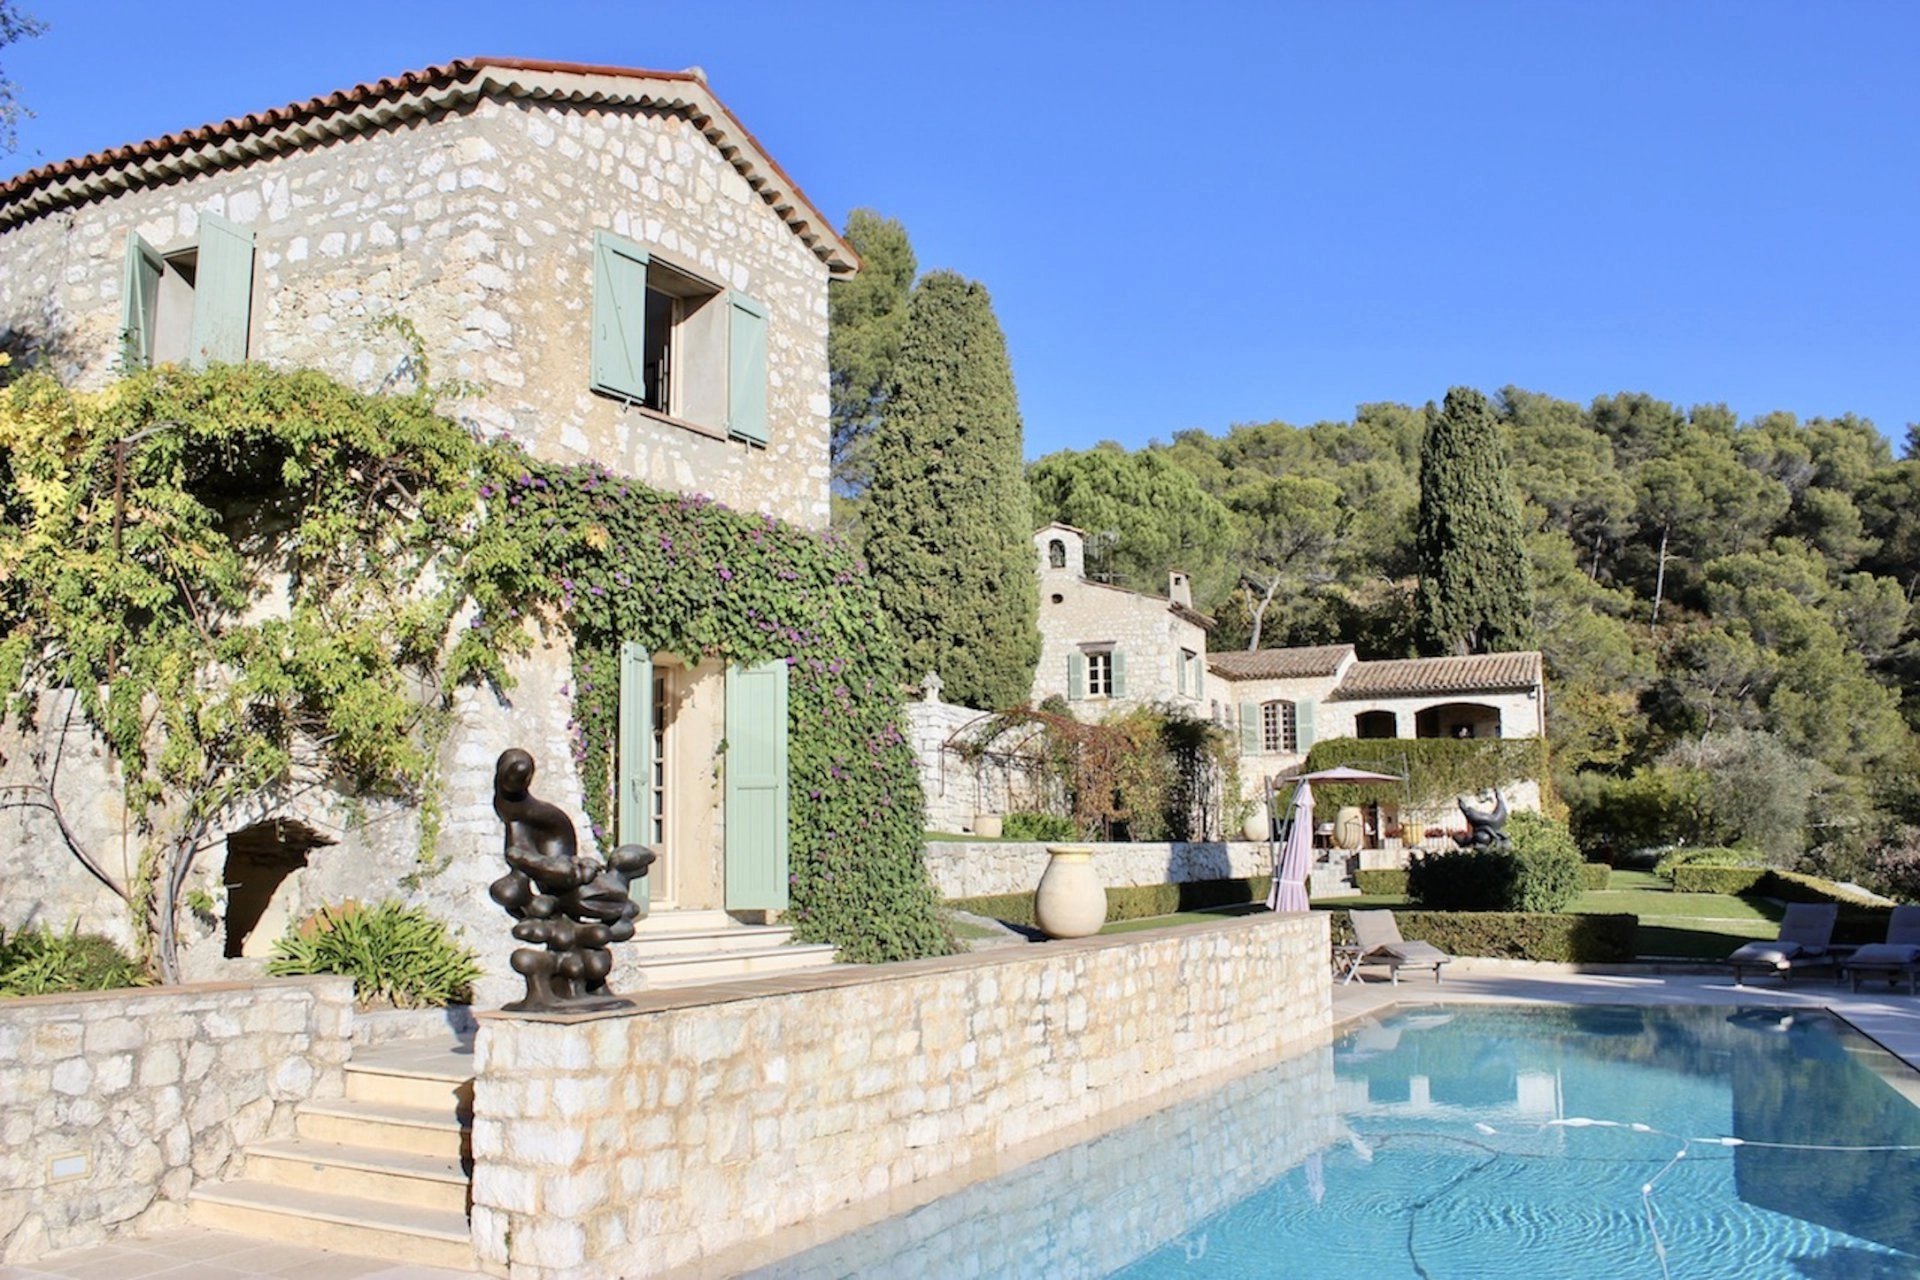 Luxurious villa with pool and guesthouse perched above St. Paul de Venice